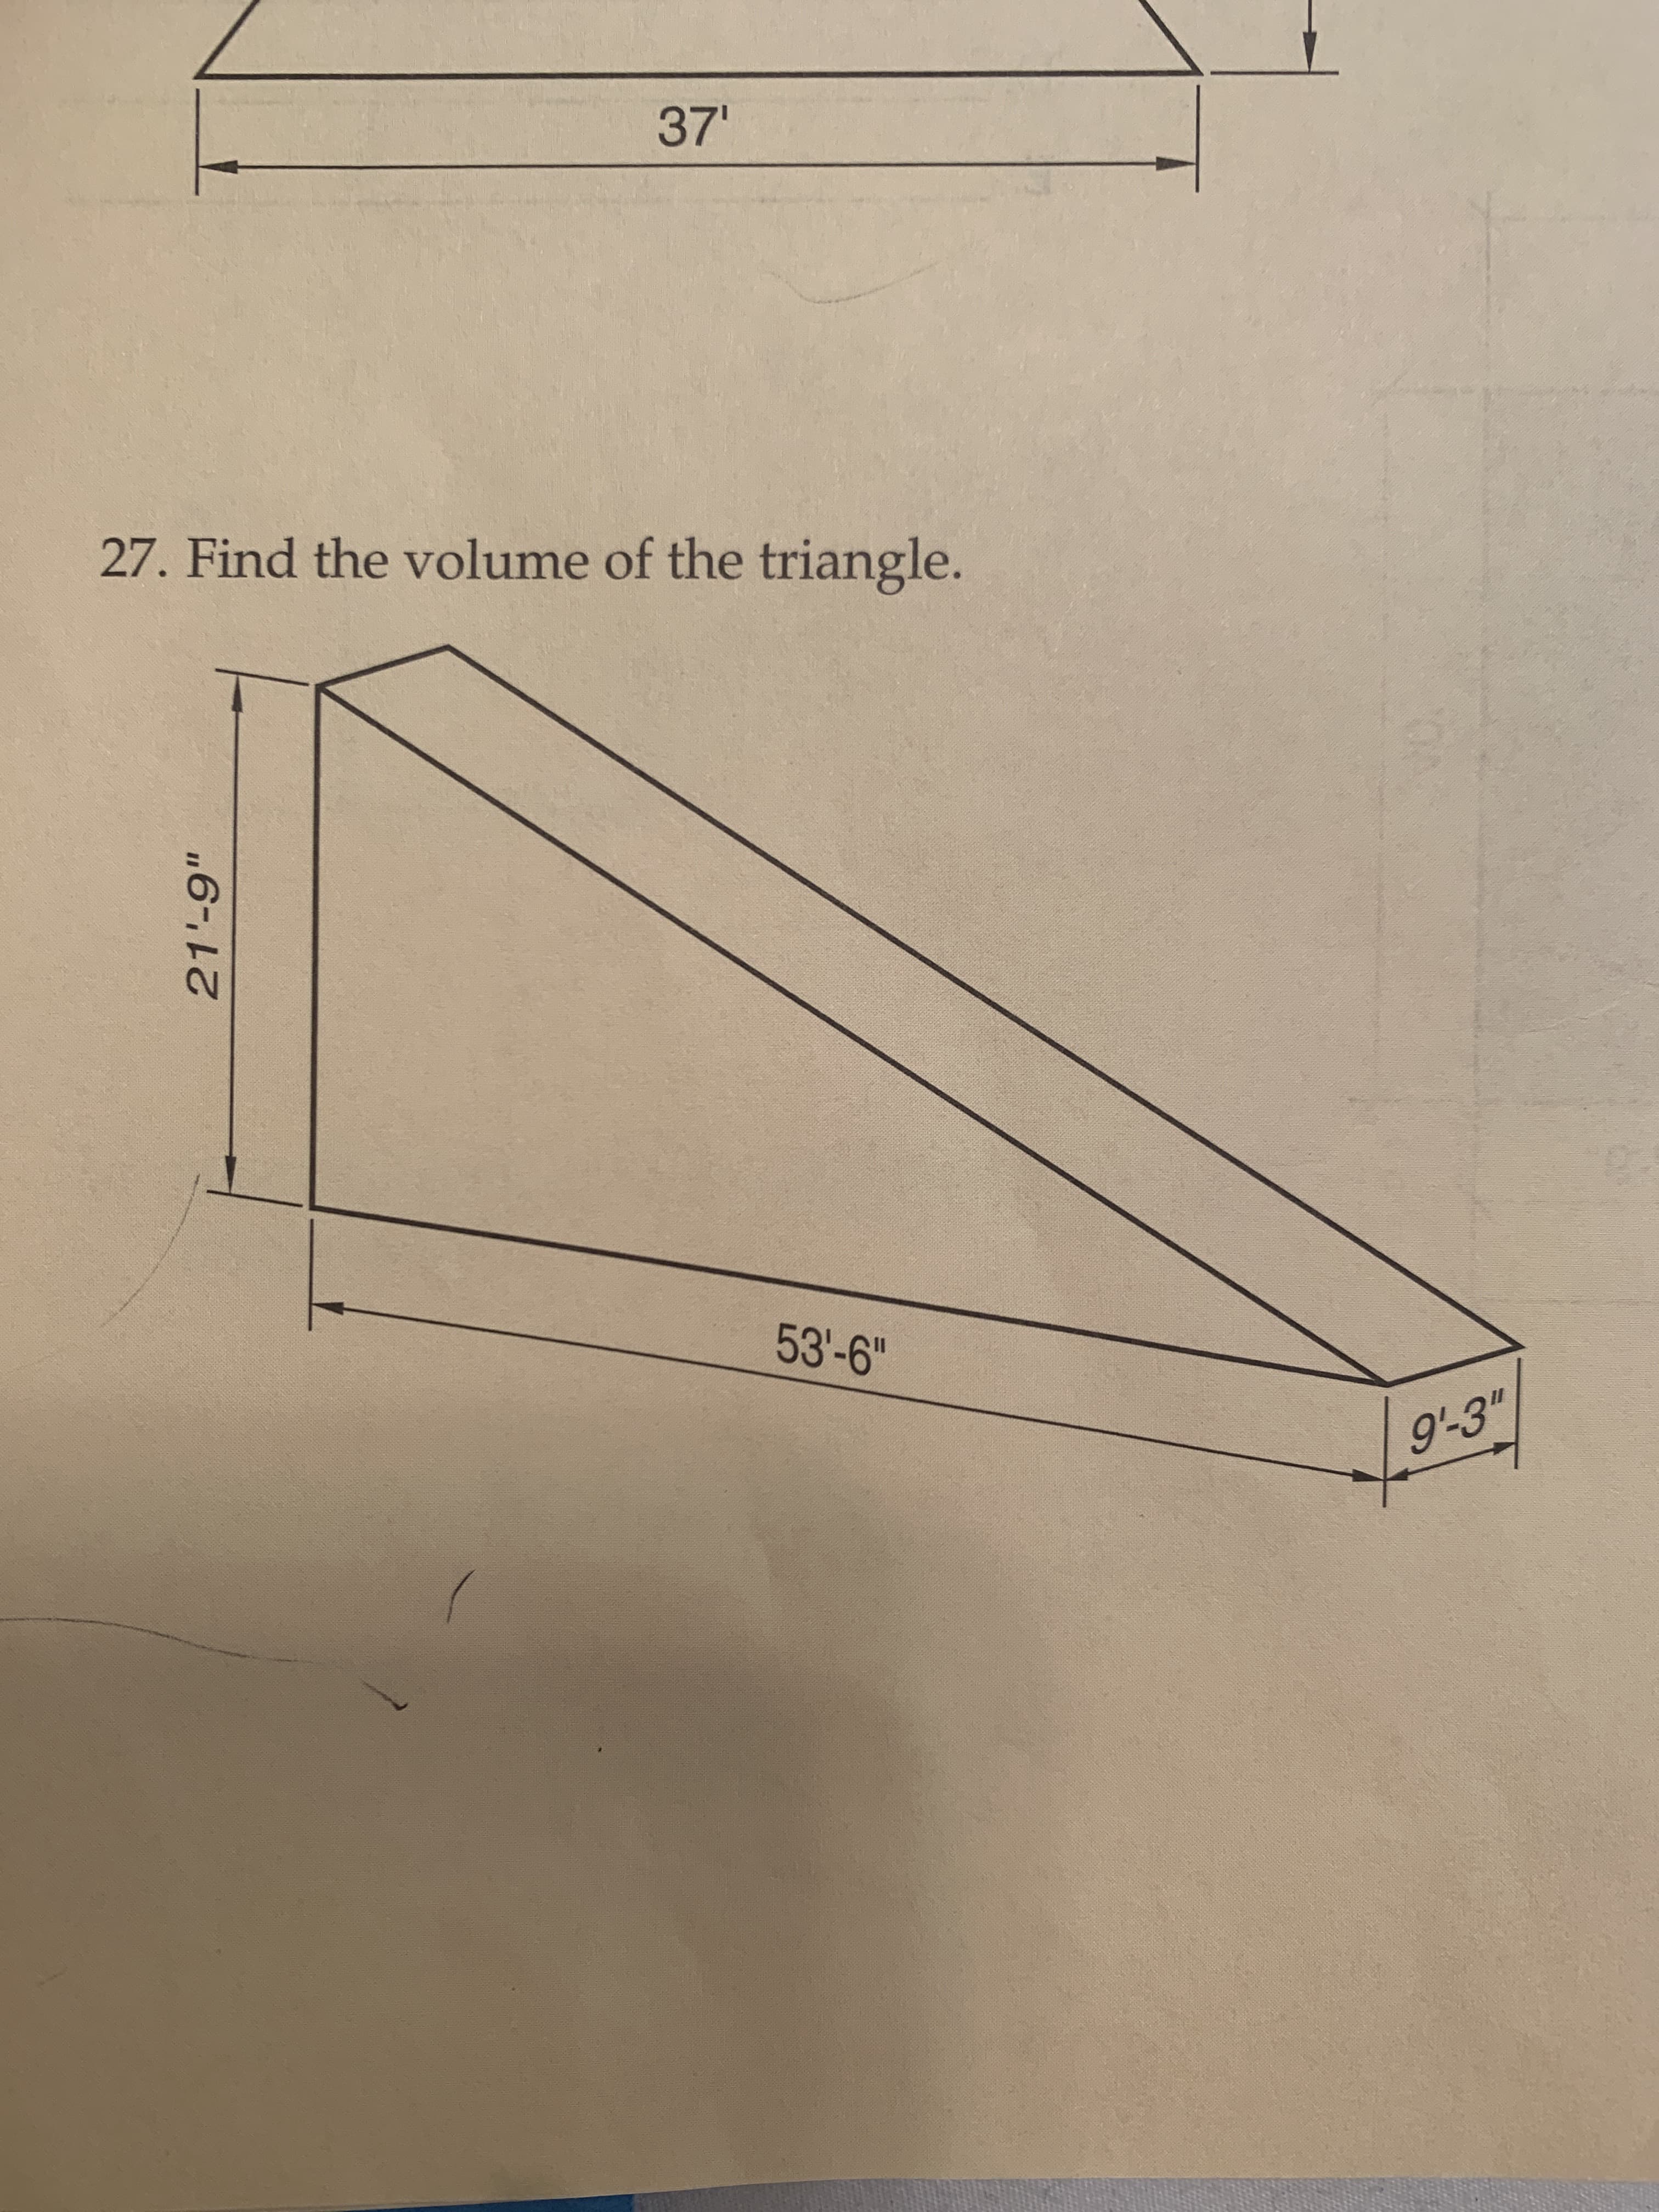 Find the volume of the triangle.
